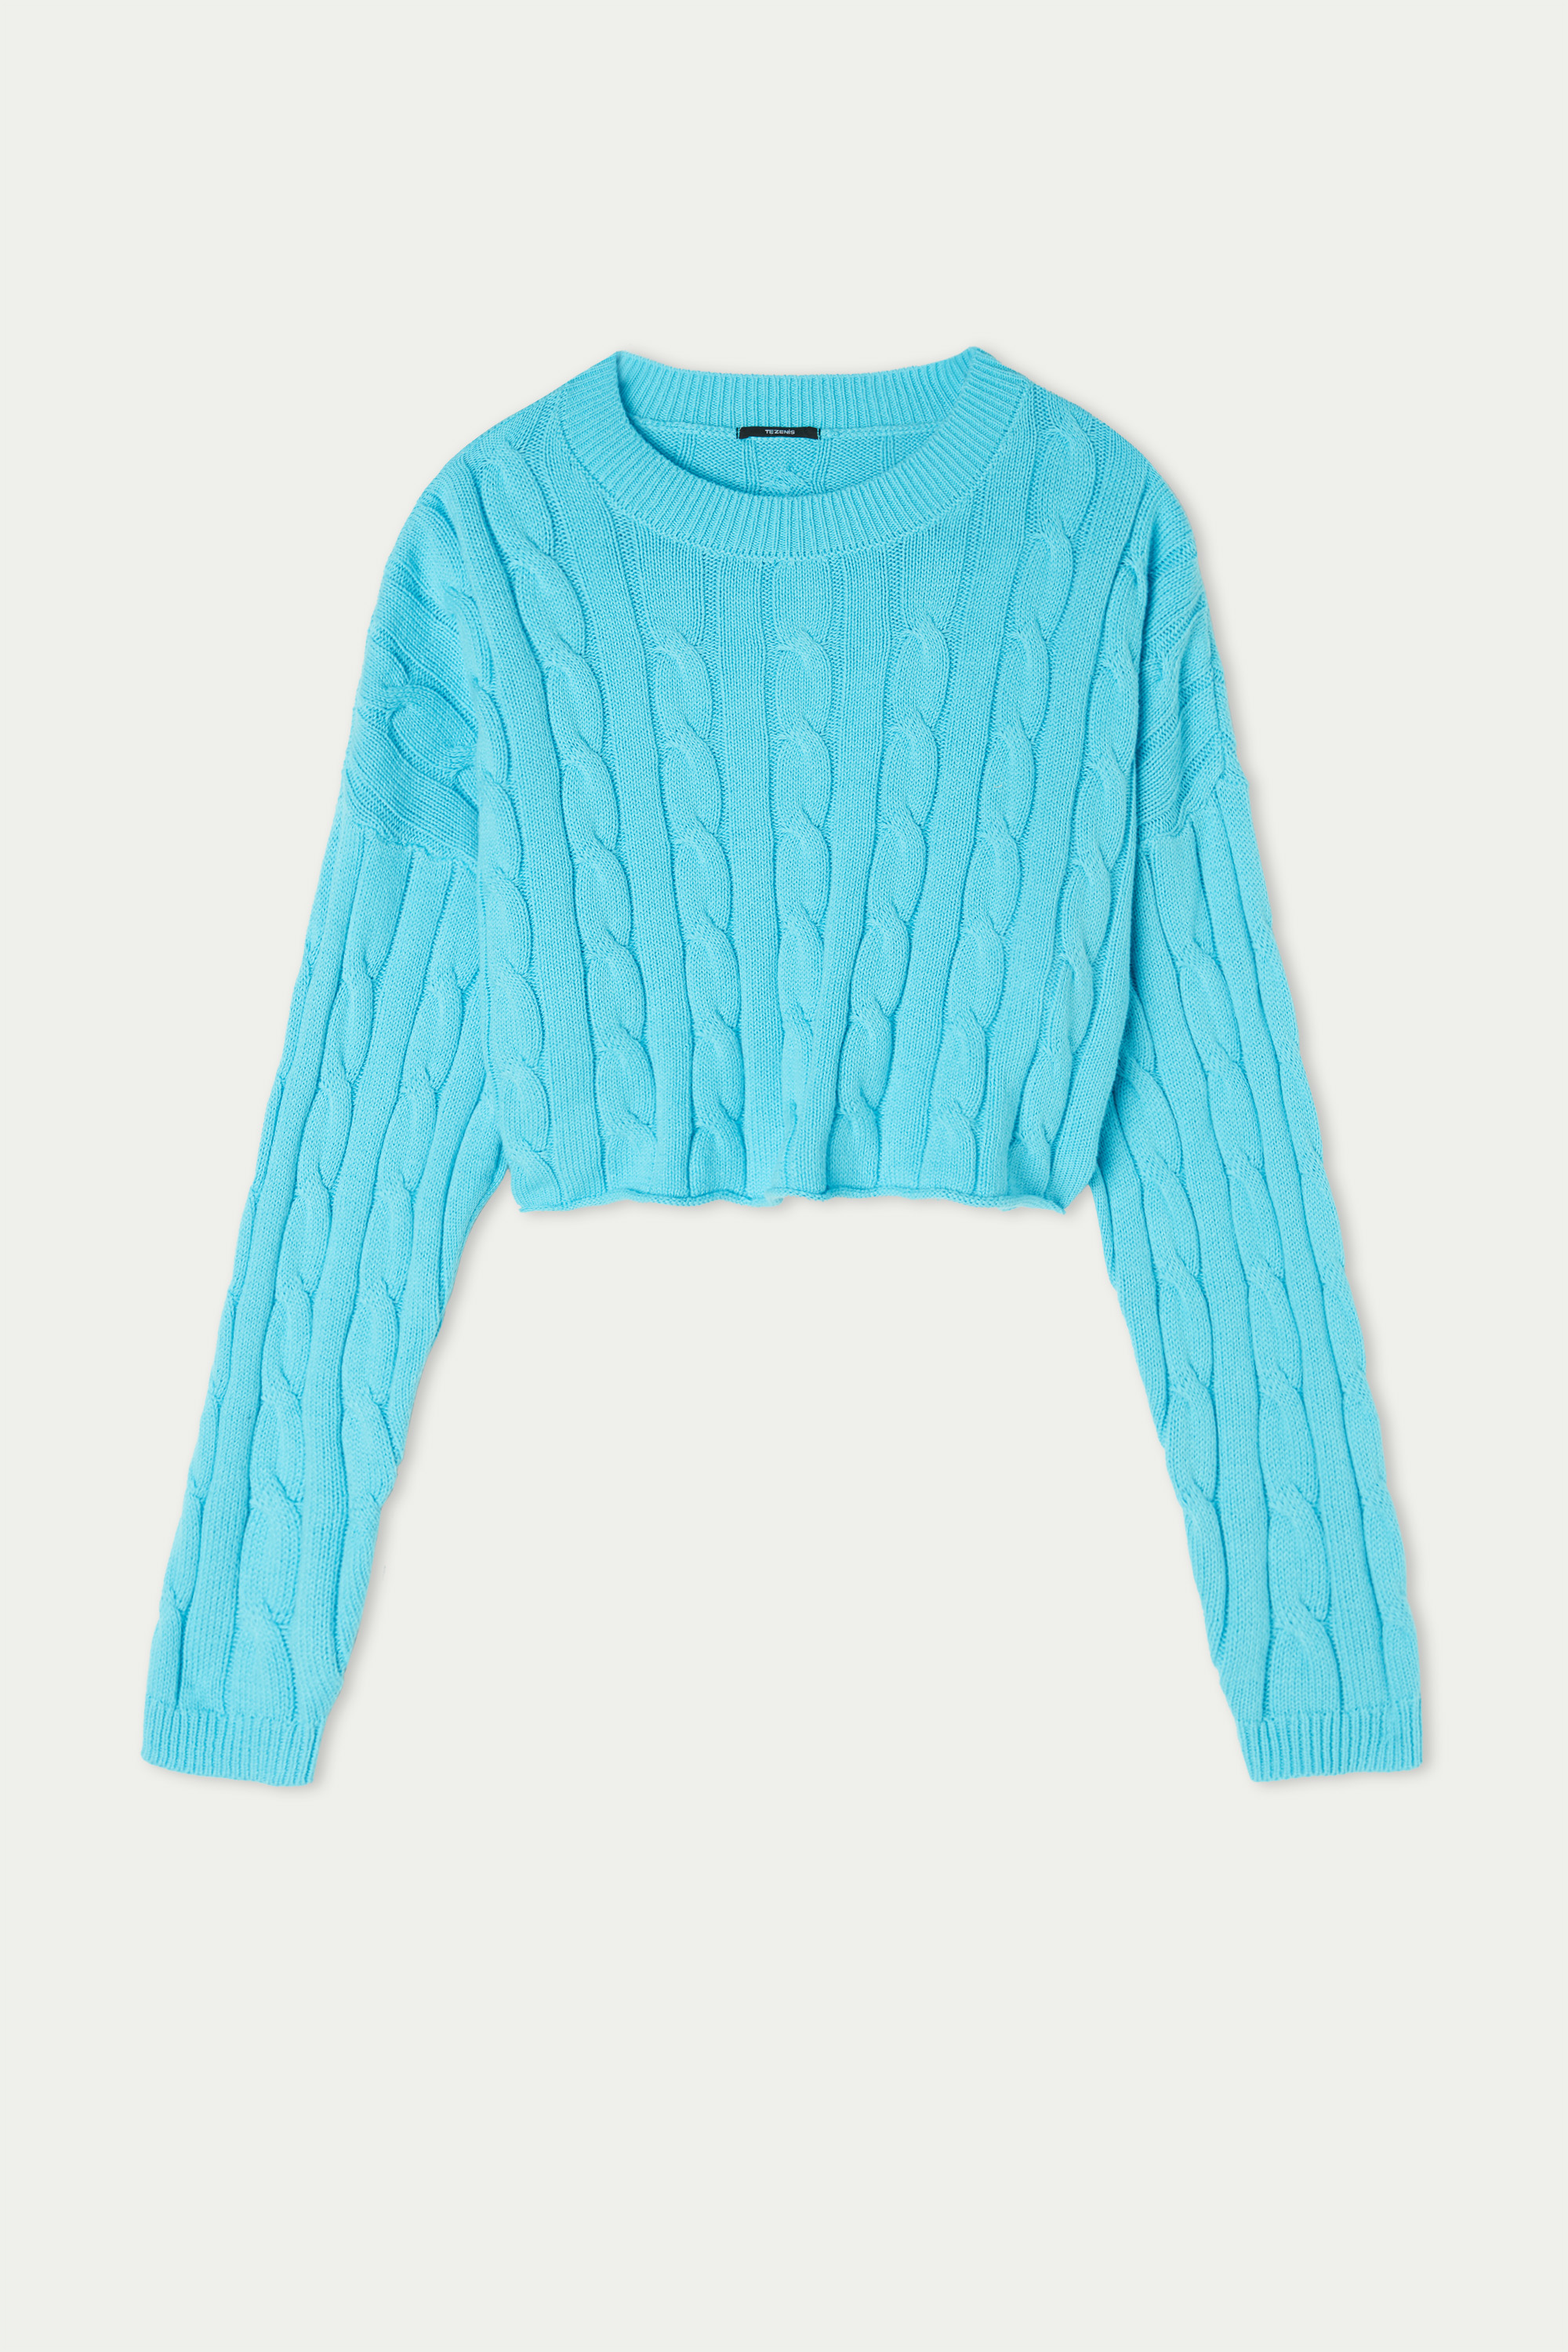 Long Sleeve Short Sweater in Fully-Fashioned Cotton with Braided Detail